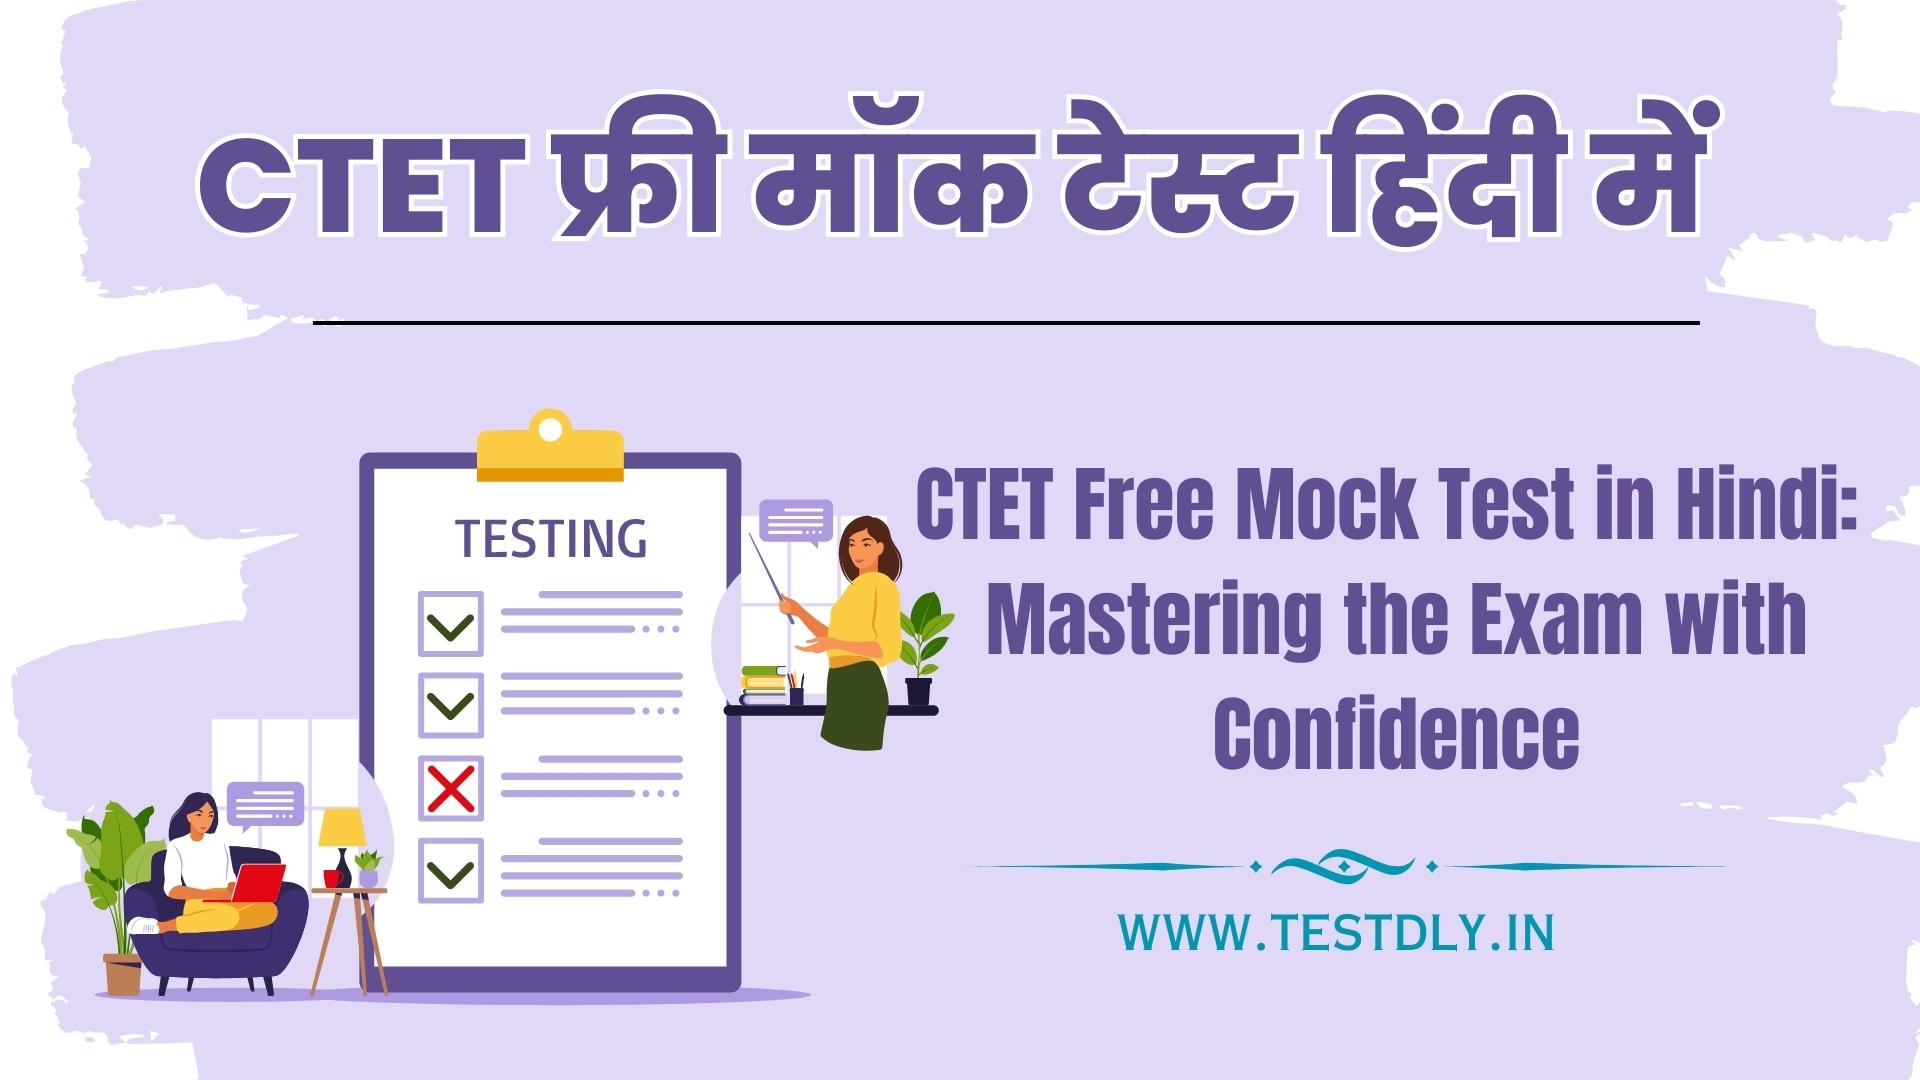 CTET Free Mock Test in Hindi: Mastering the Exam with Confidence